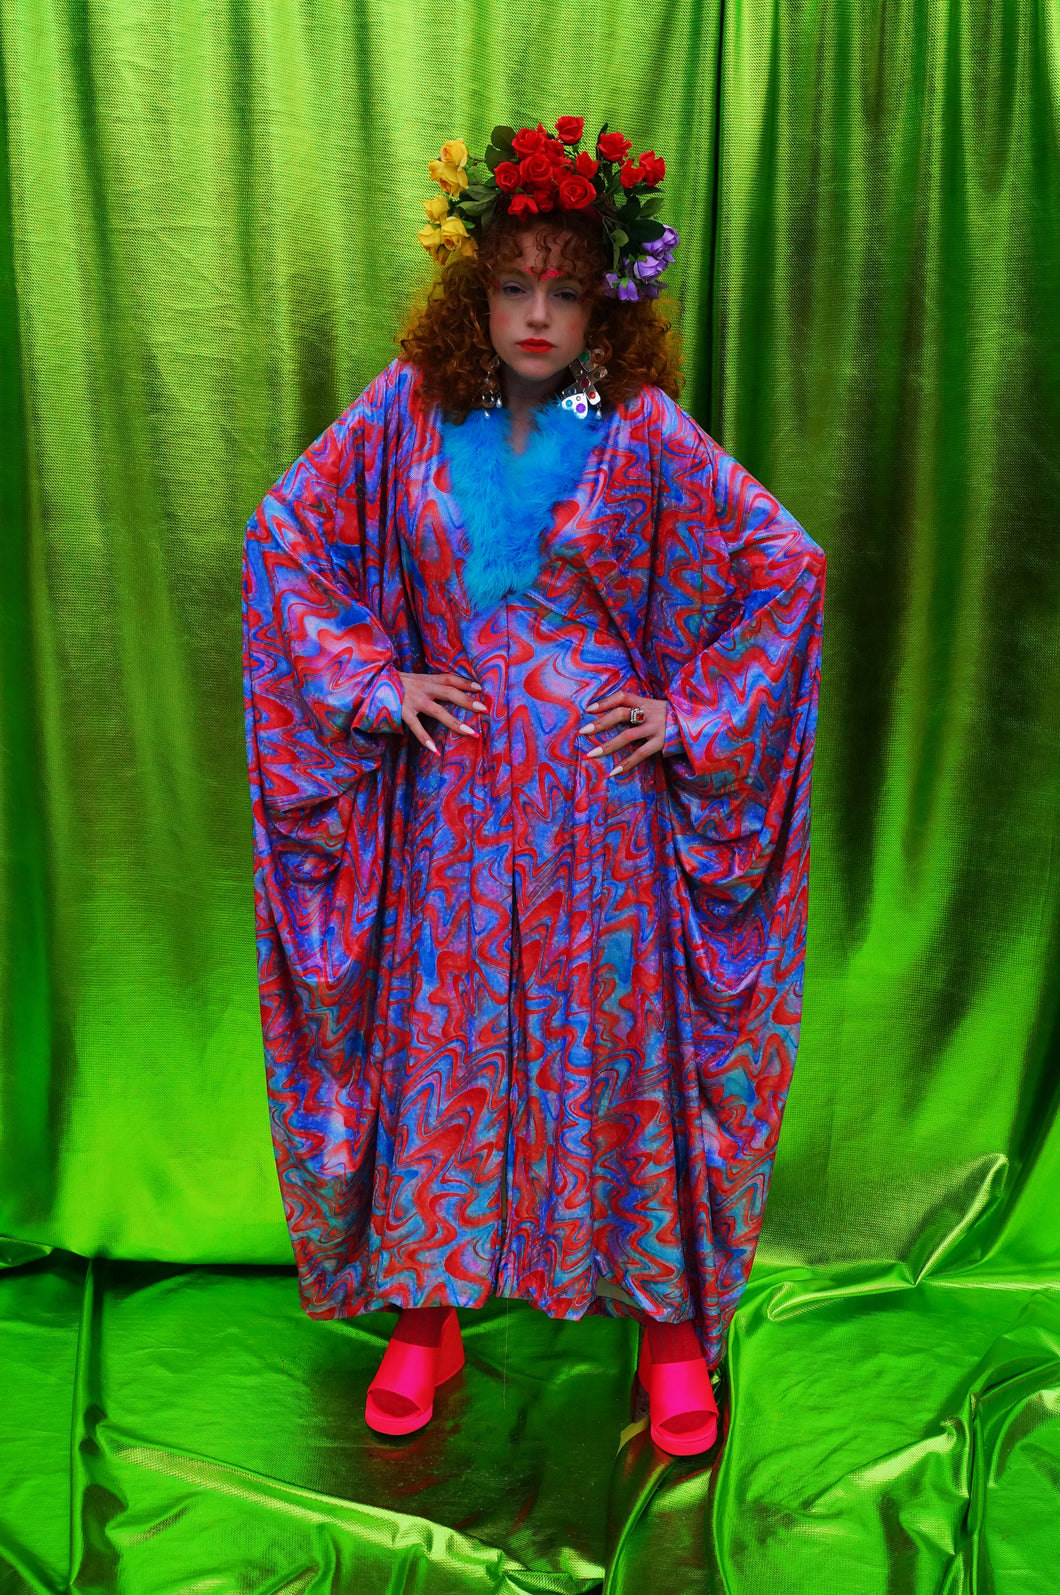 Groovy Chic Psychedelic holographic pink and blue Marabou trim kaftan Gown